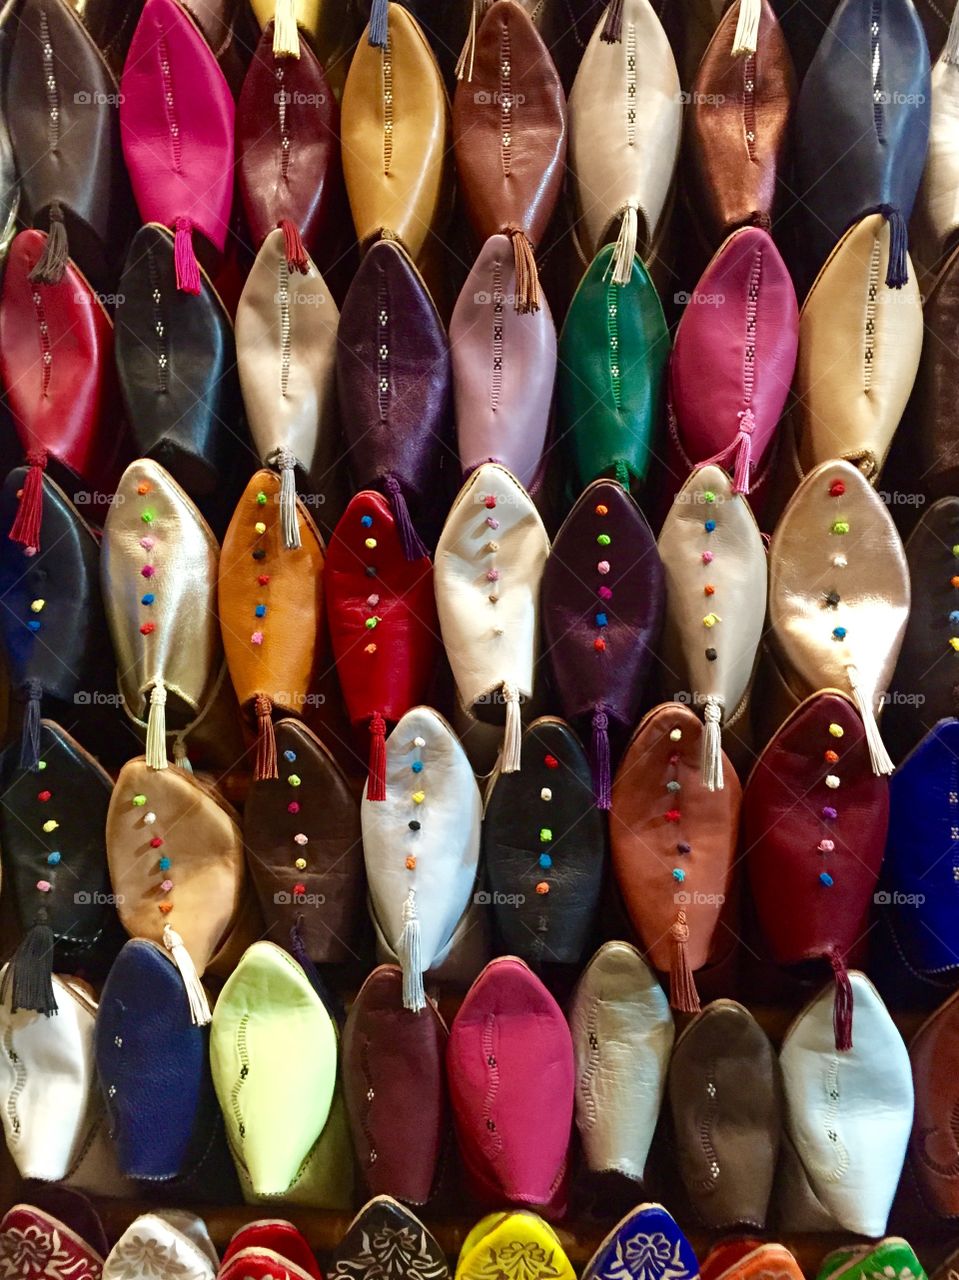 Leather shoes for sale in Marrakech